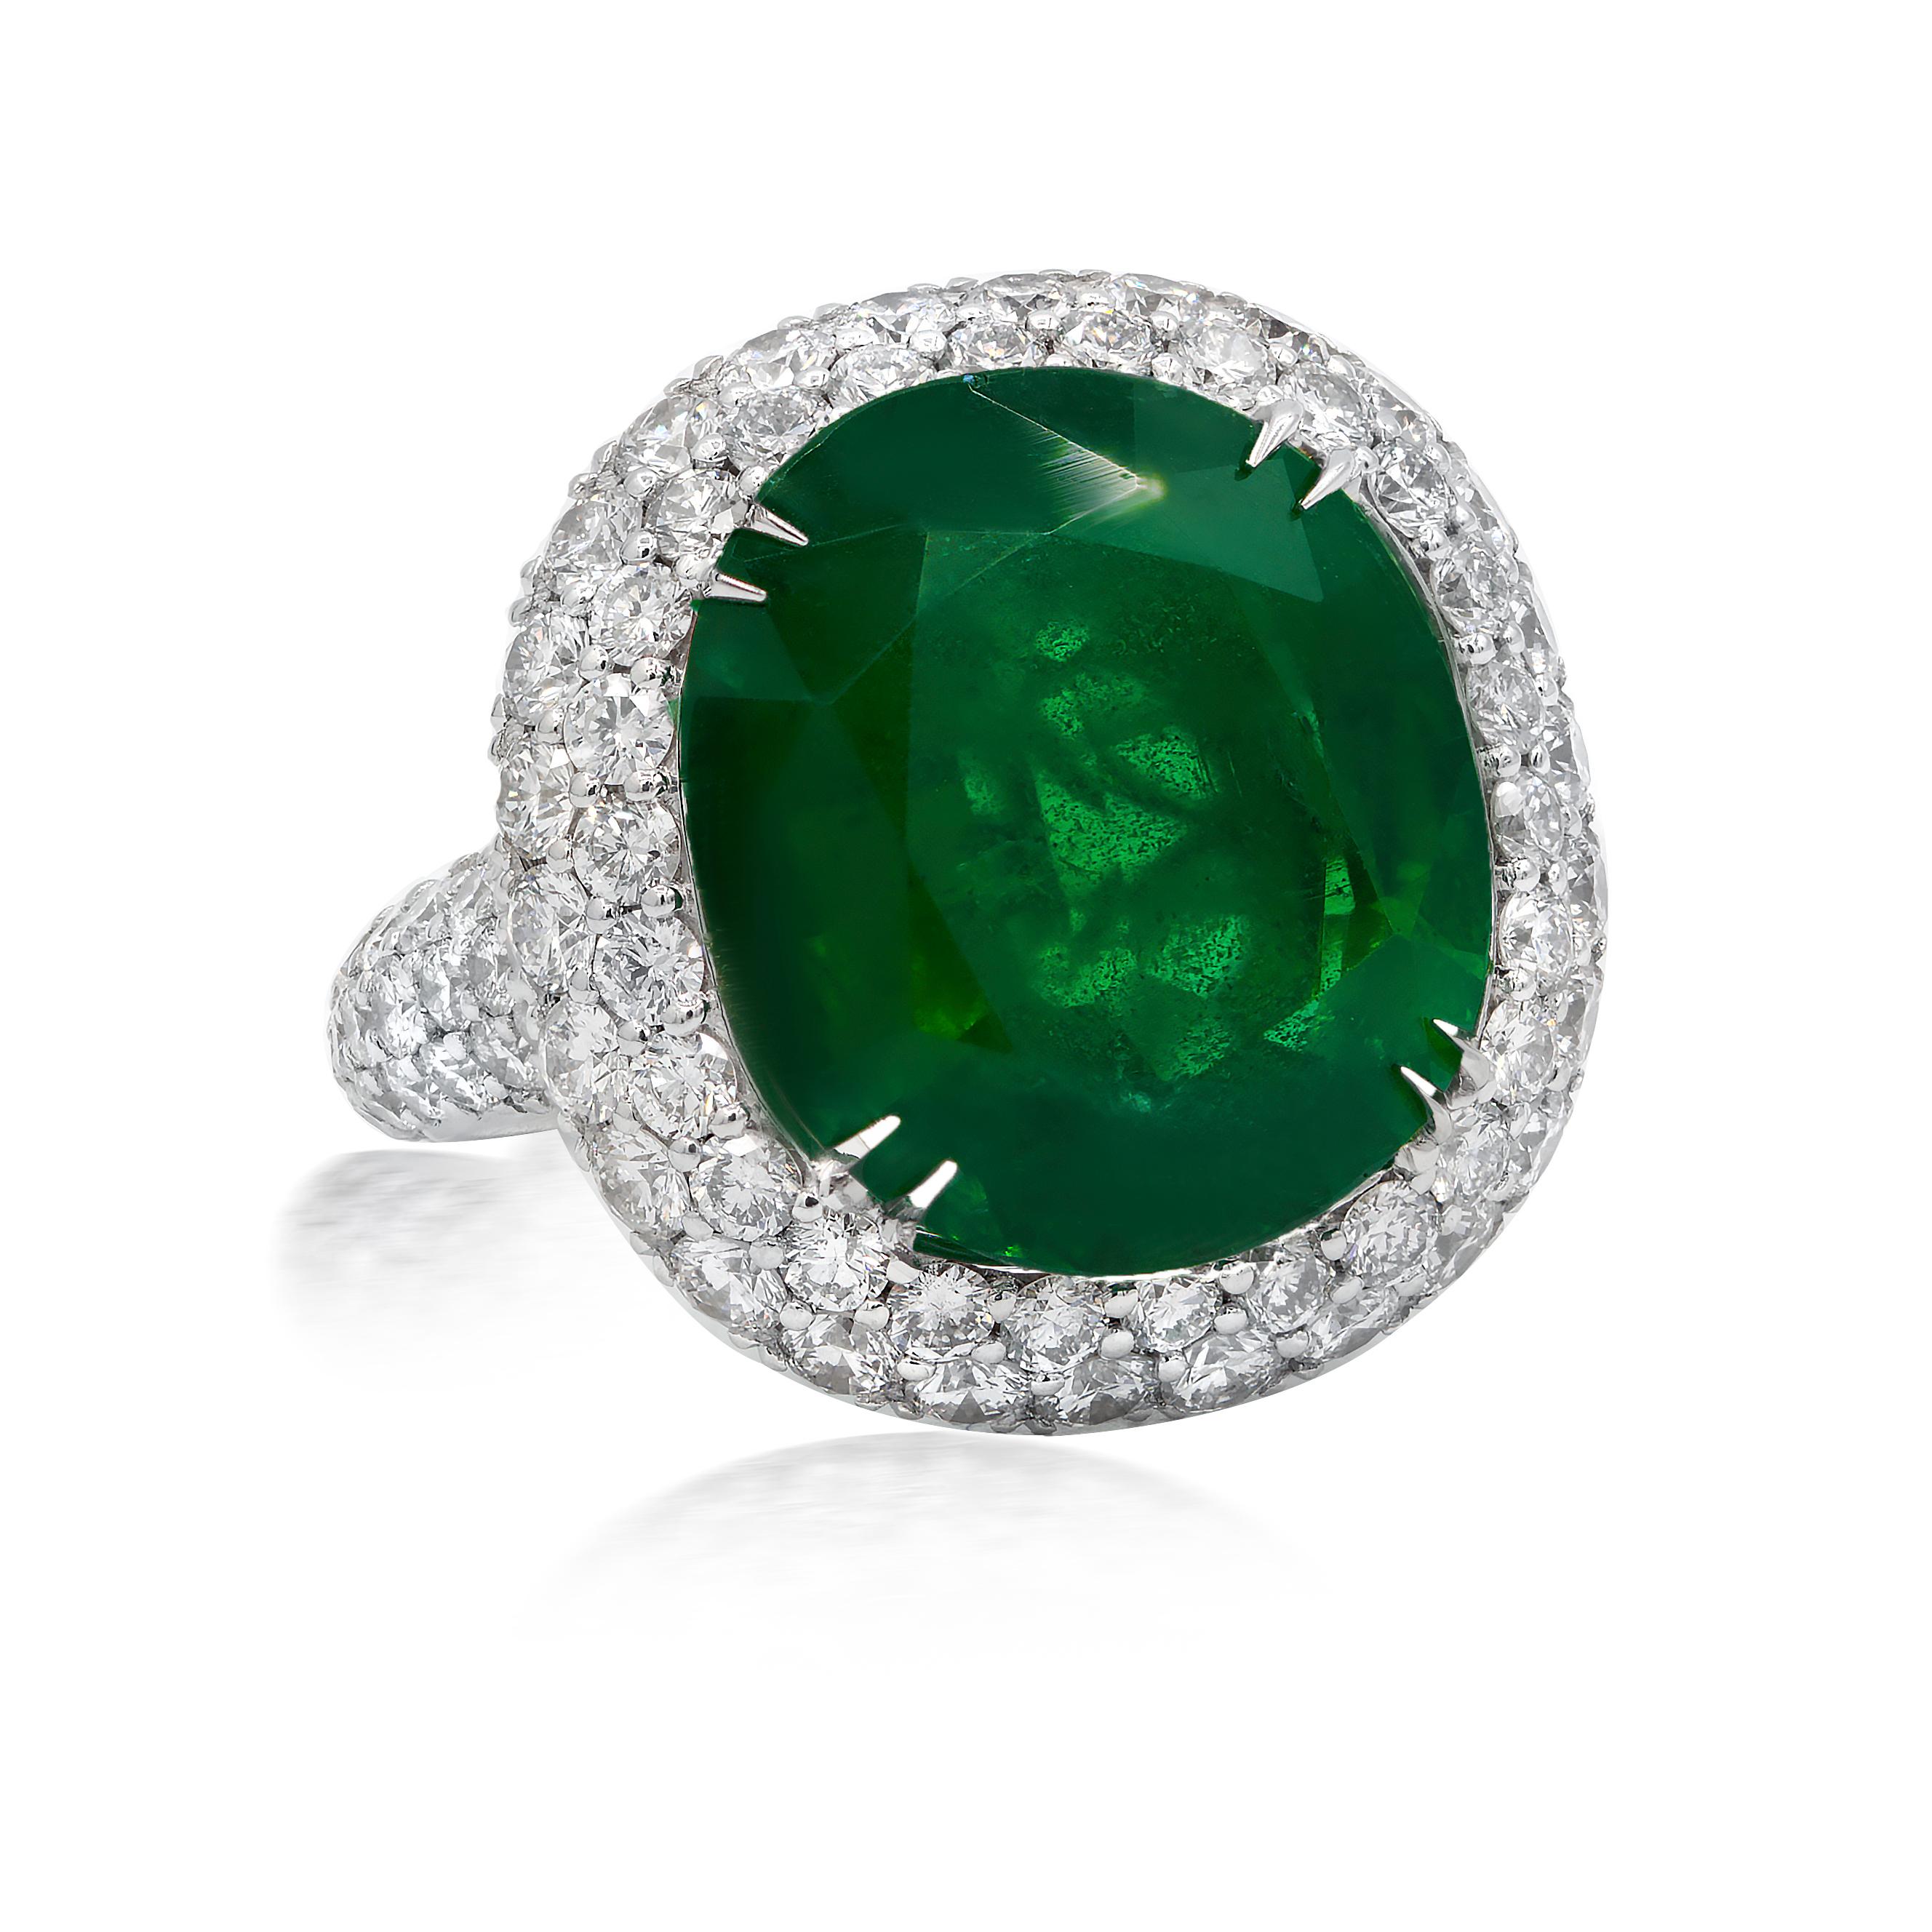 18kt white gold double halo green oval emerald diamond ring features 10.95cts green emerald with 4.50cts of diamonds
